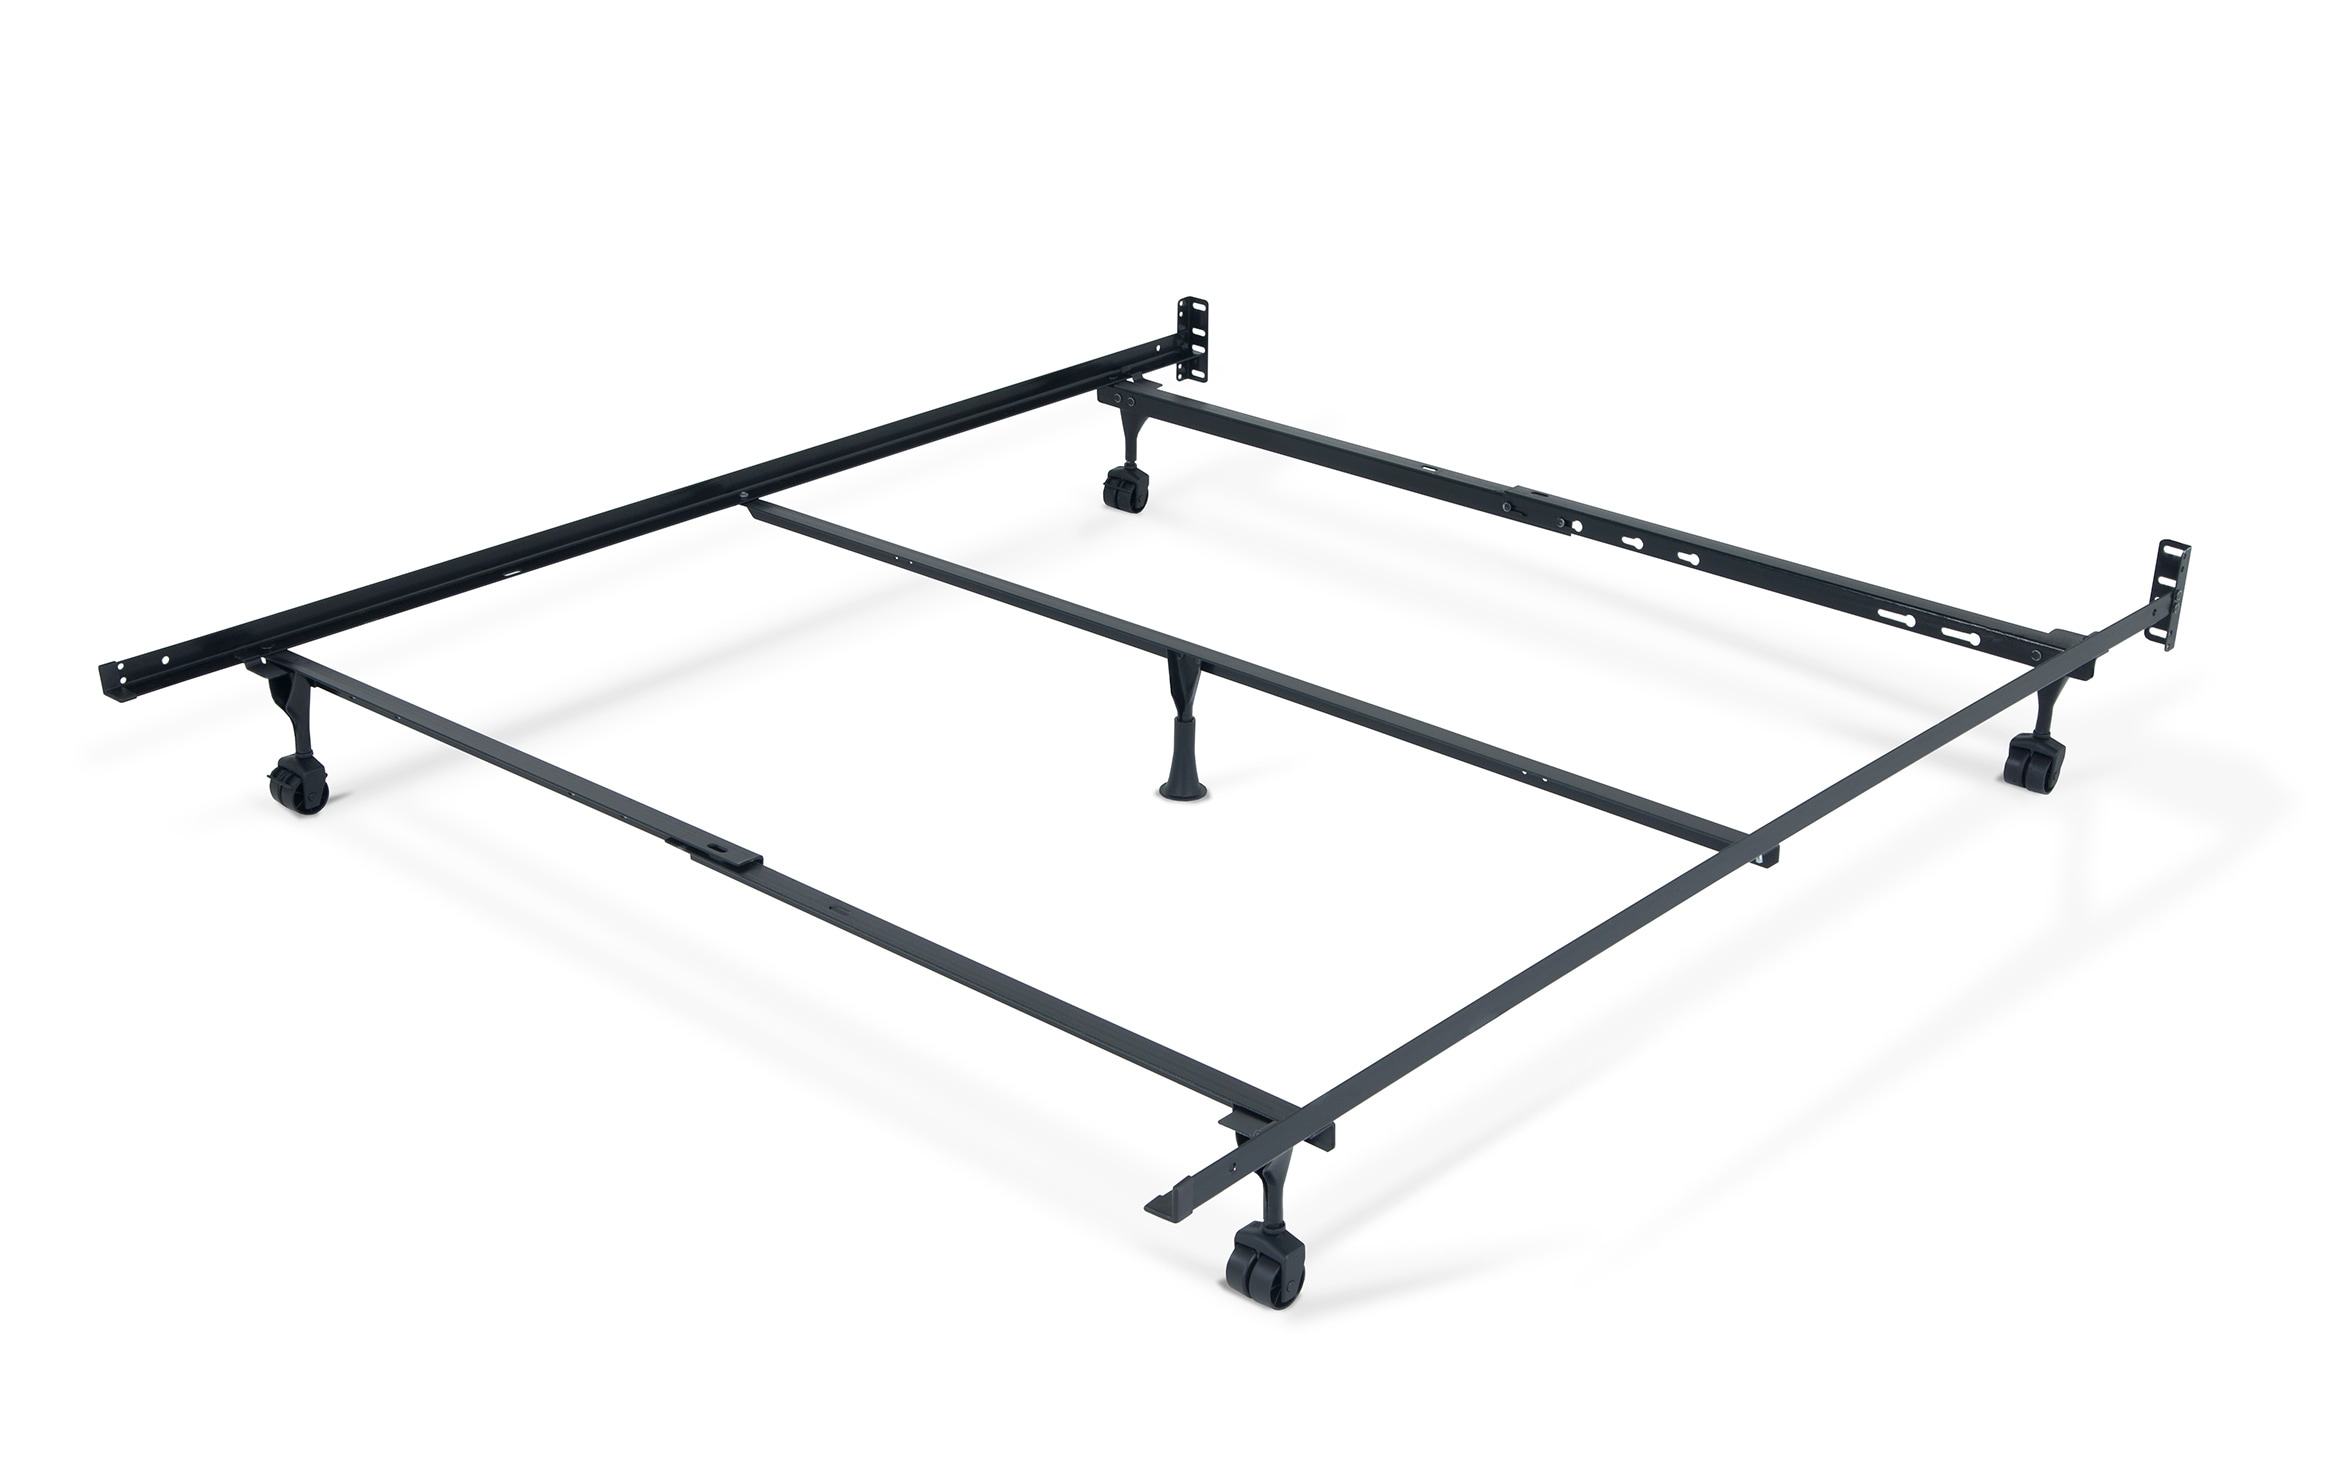 Queen King California Bed Frame, What Are The Dimensions Of A King Bed Frame